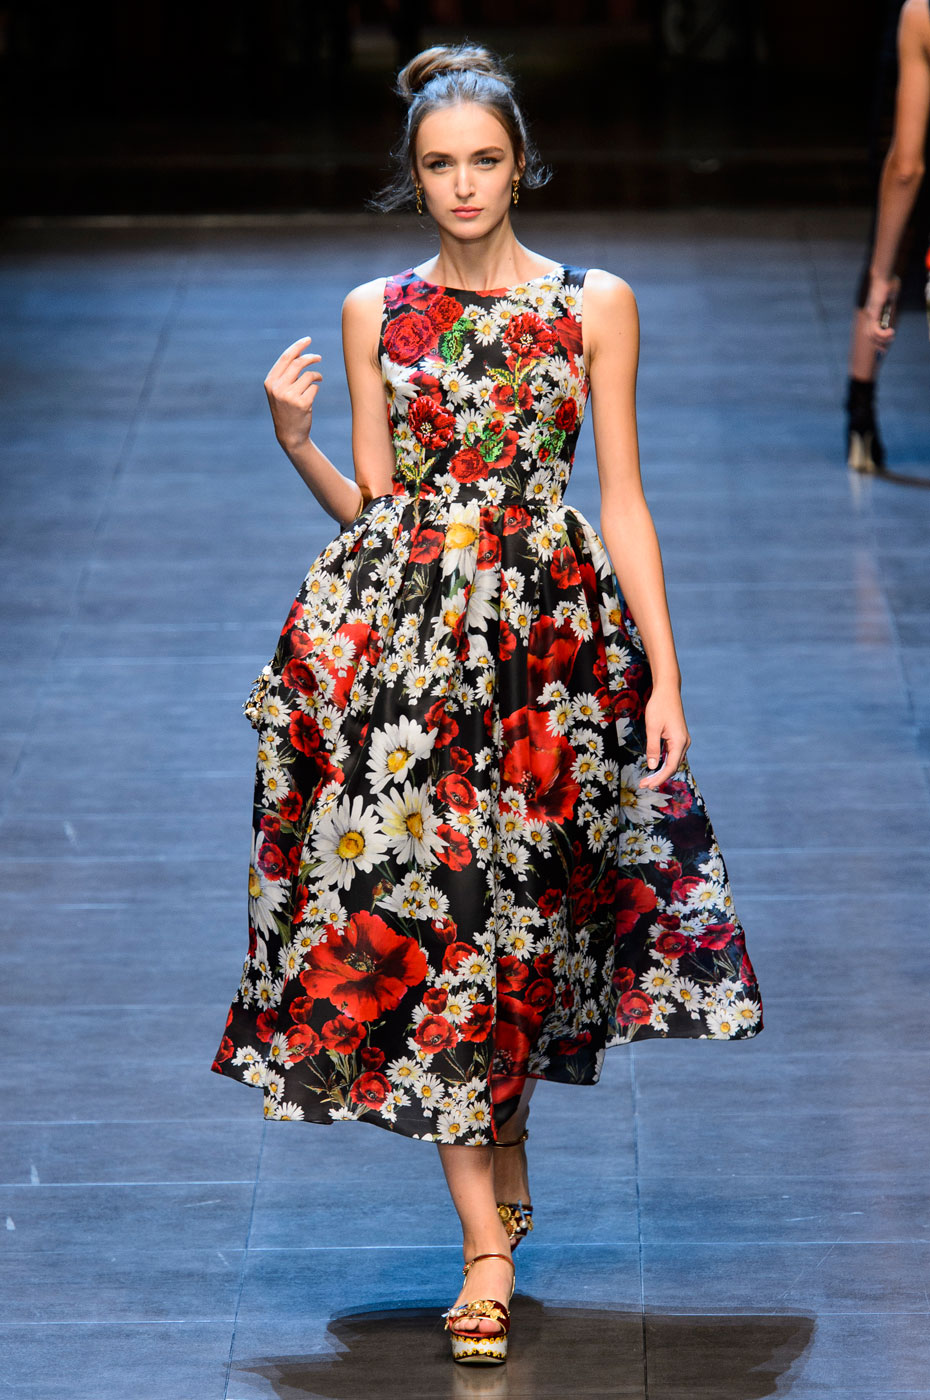 &amp;#208;&nbsp;&amp;#208;&amp;#208;&amp;#209;&amp;#131;&amp;#208;&amp;#209;&amp;#130;&amp;#208;&amp;#209;&amp;#130; &amp;#209;&amp;#129;&amp;#208;&amp;#190; &amp;#209;&amp;#129;&amp;#208;&amp;#208;&amp;#184;&amp;#208;&amp;#186;&amp;#208; &amp;#208;&amp;#208; photos of dolce and gabanna dresses